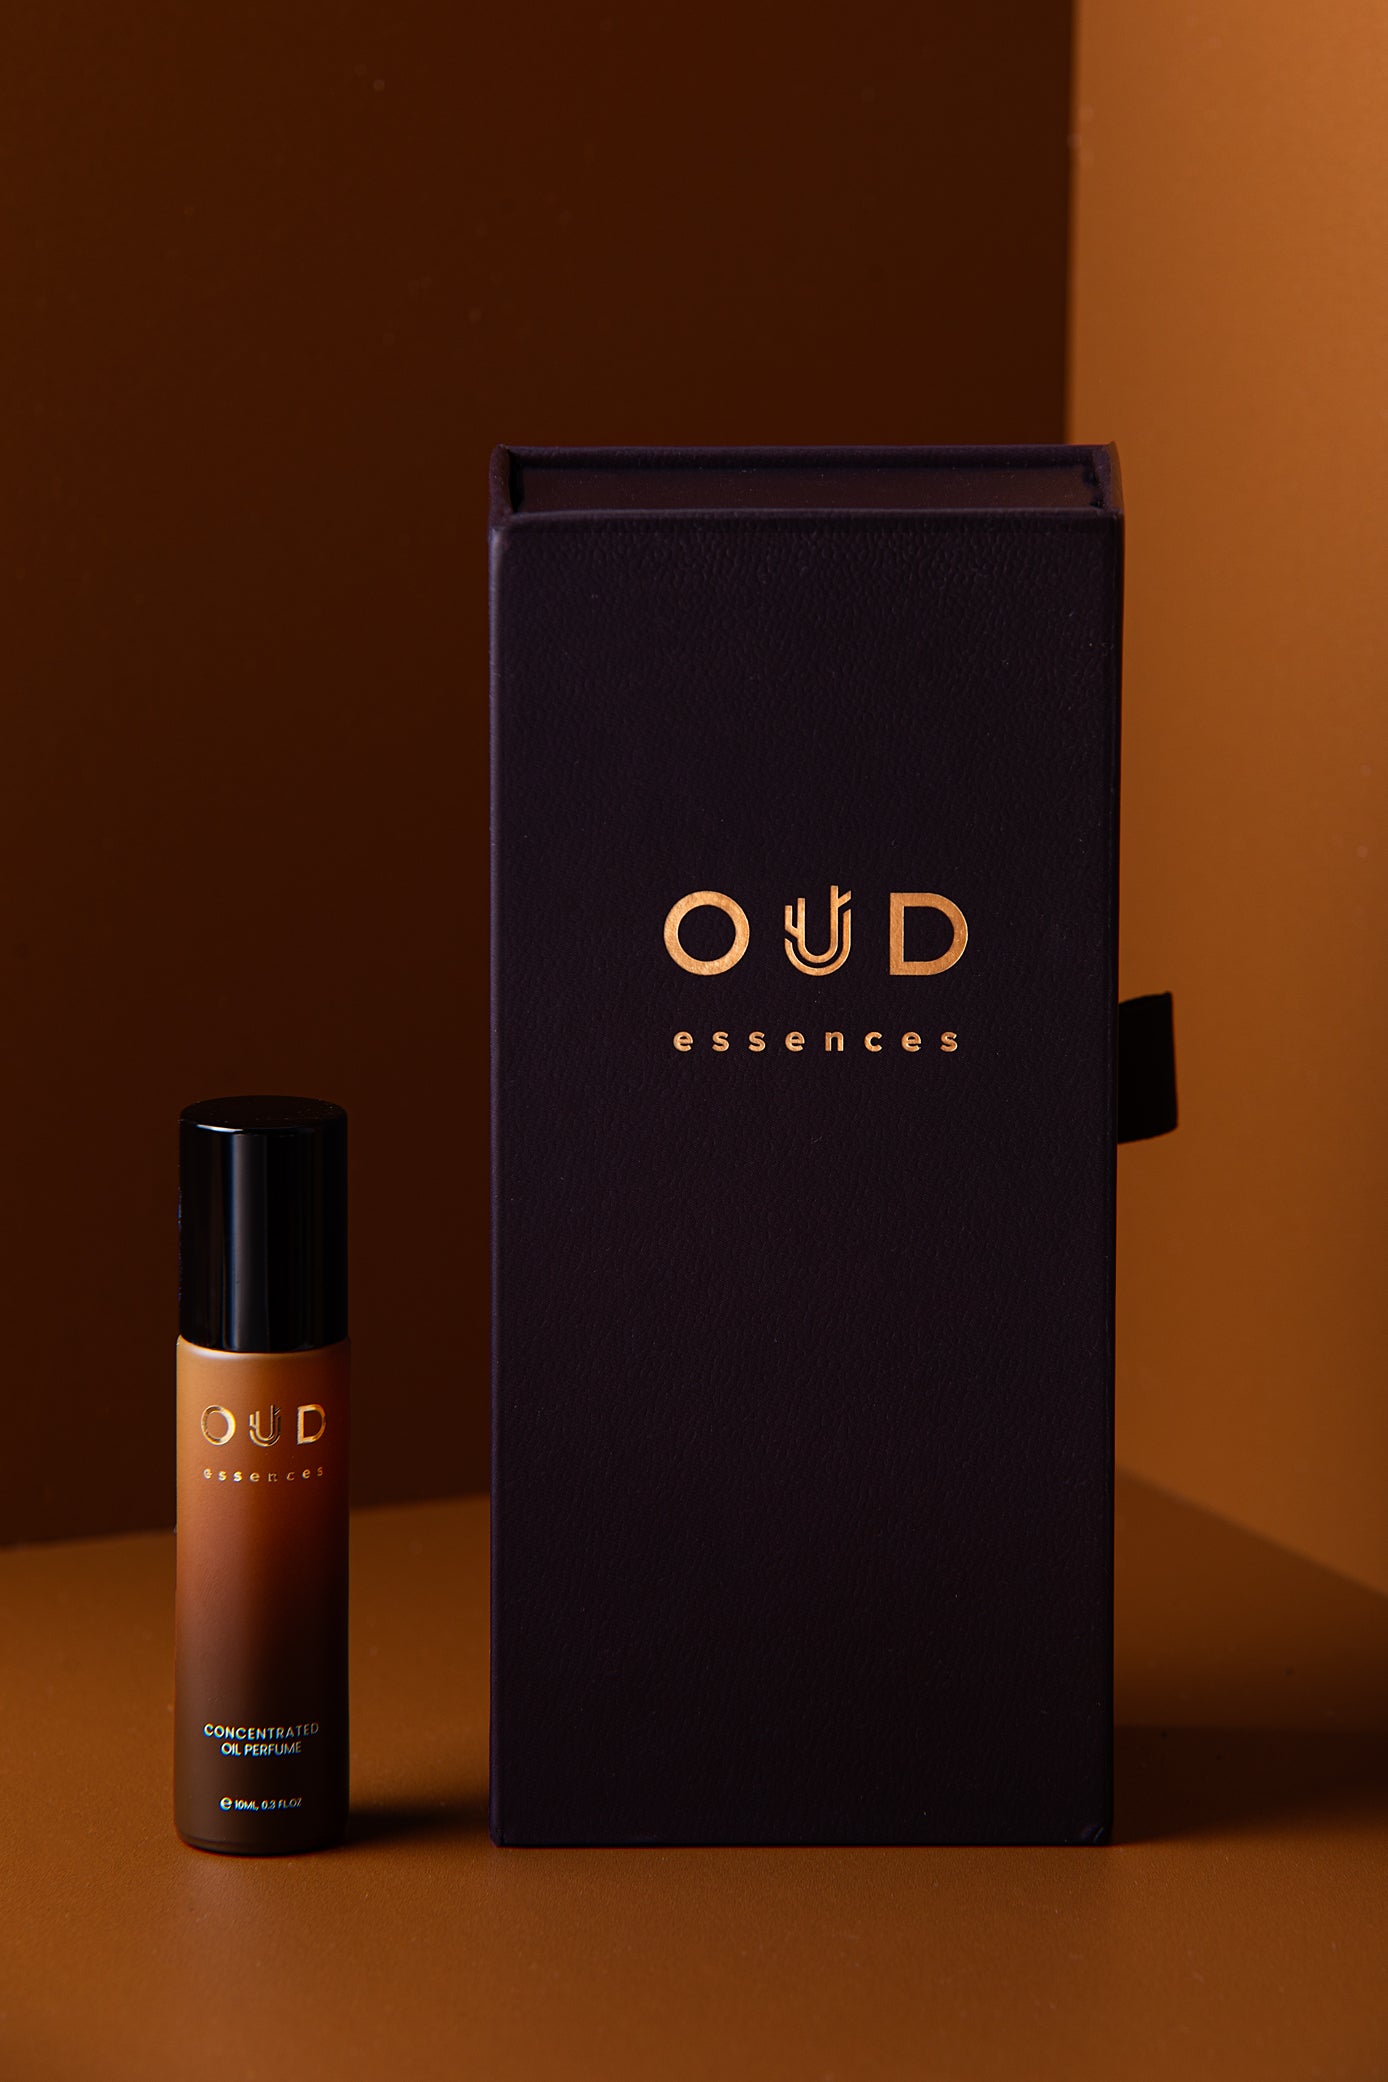 Roll on oil based perfume by OUD essences